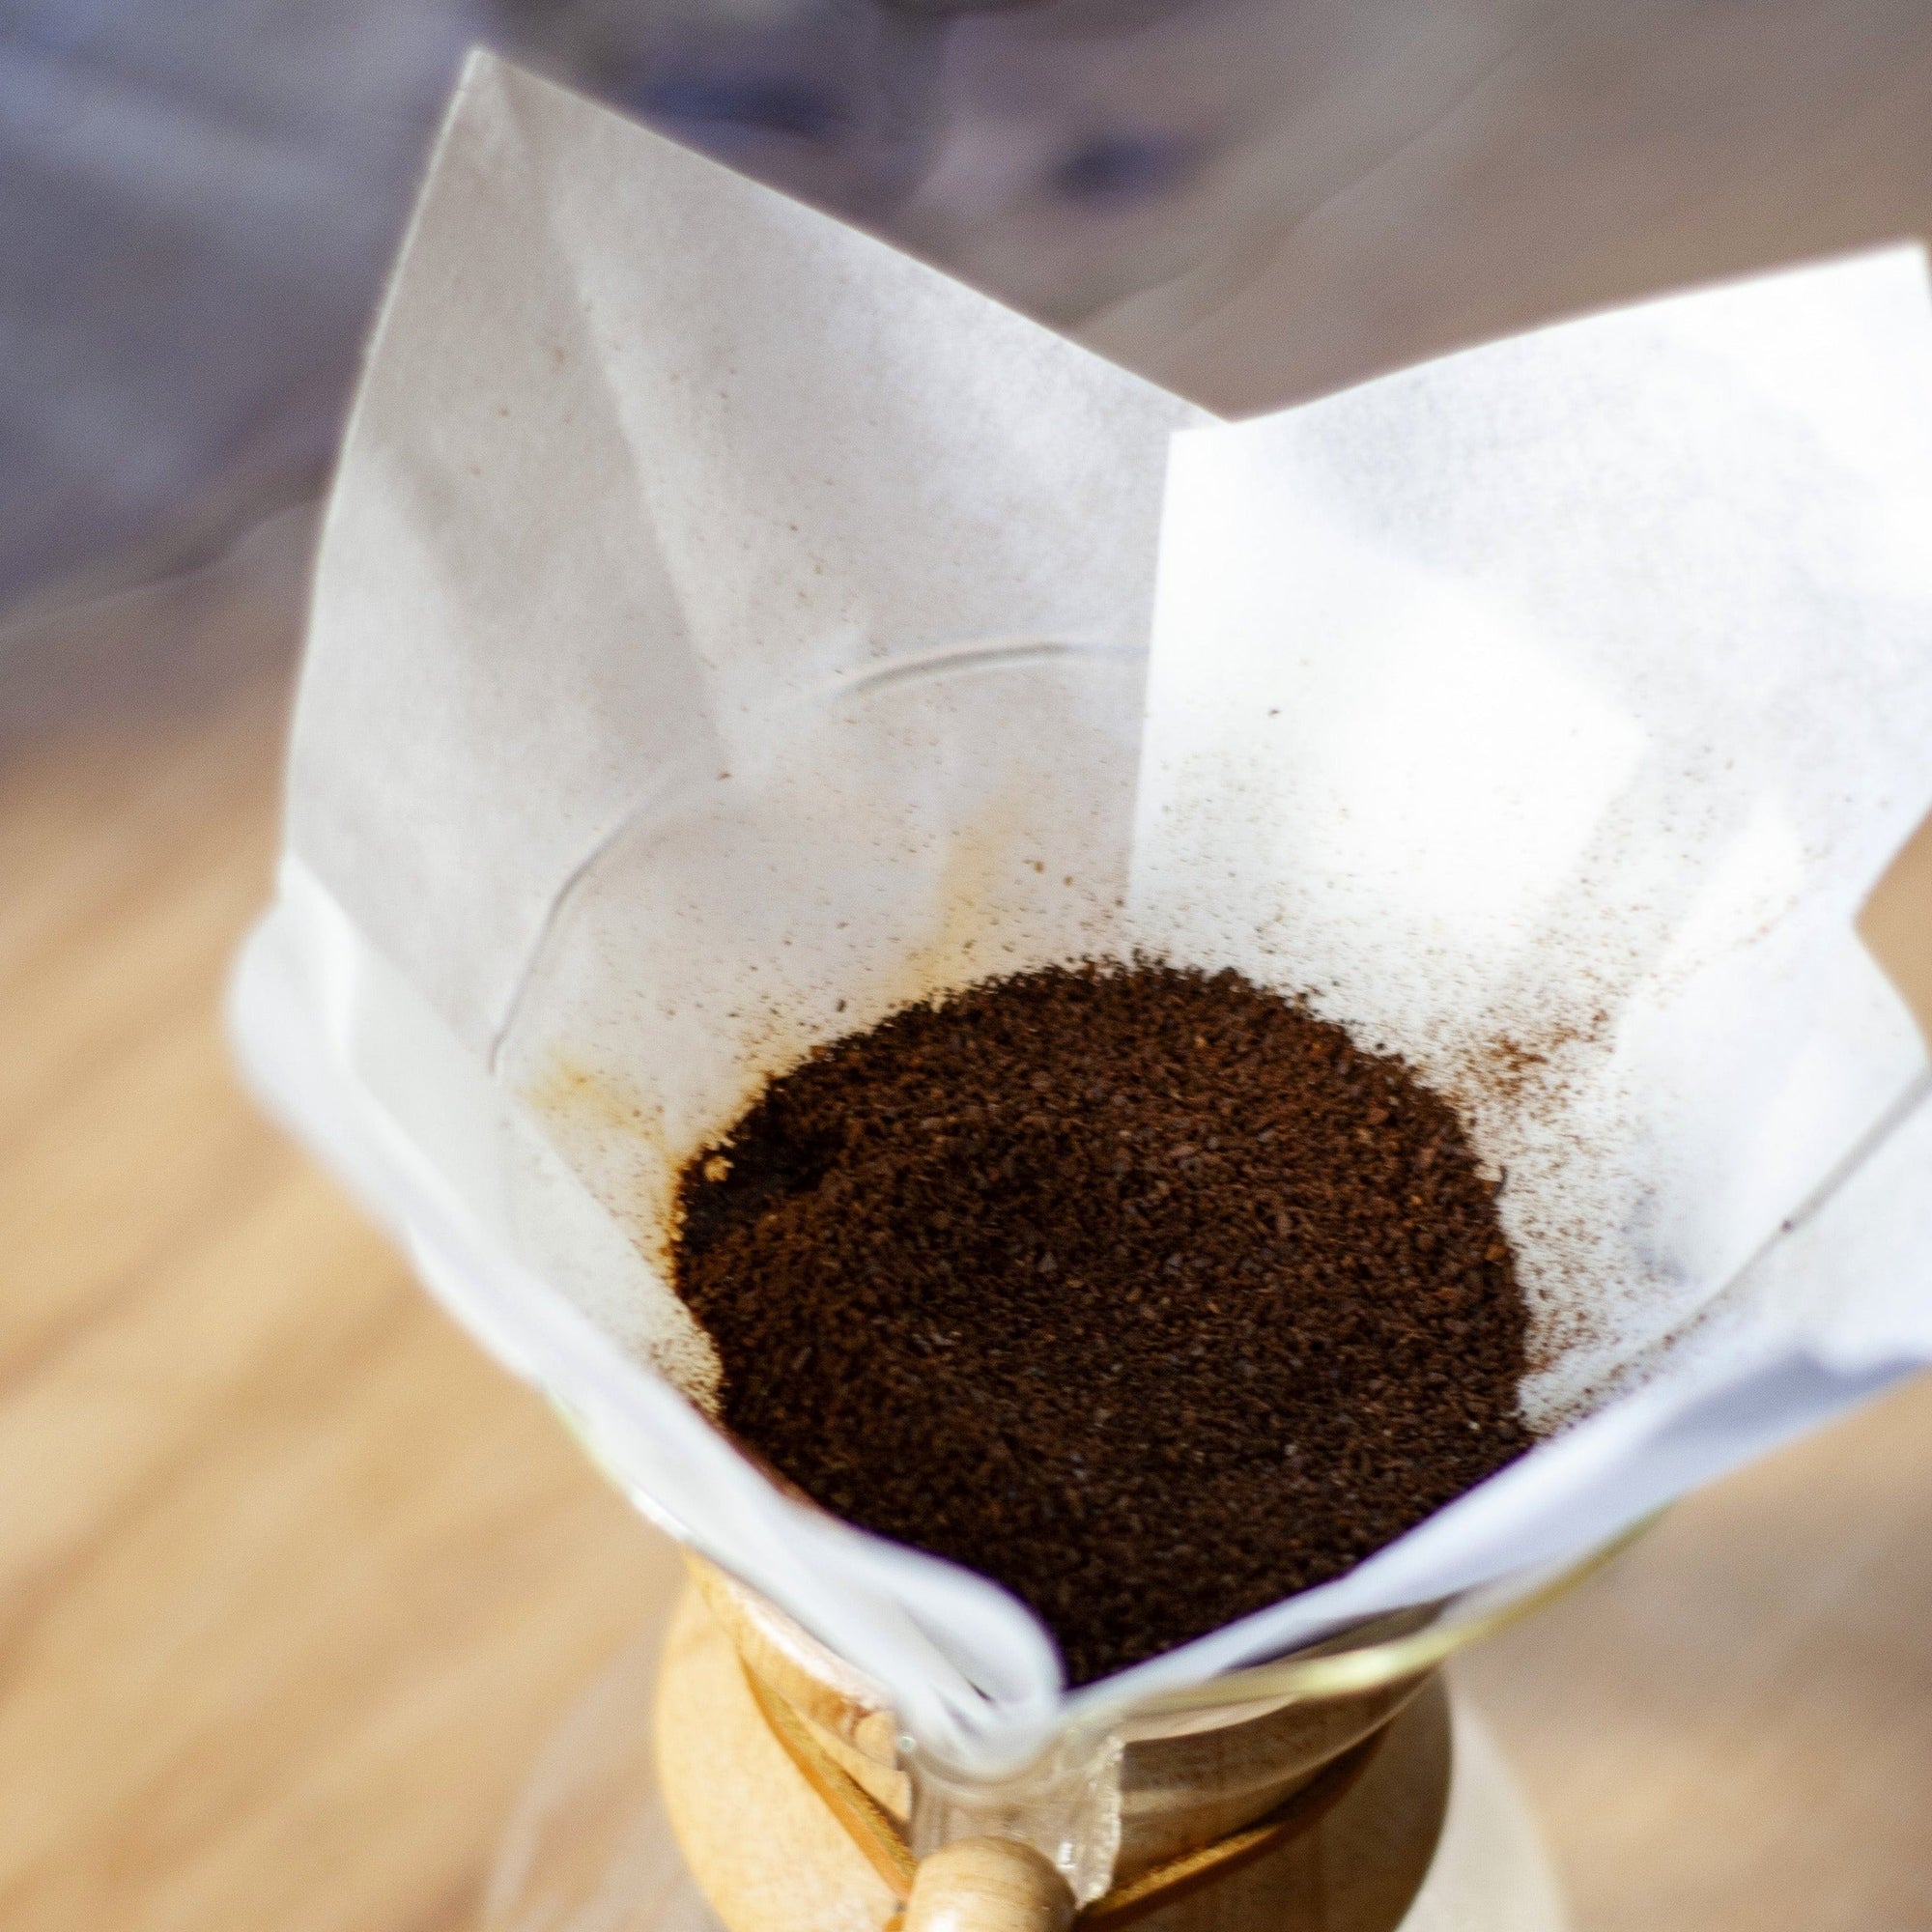 Square Chemex filters - 6 to 9 cups